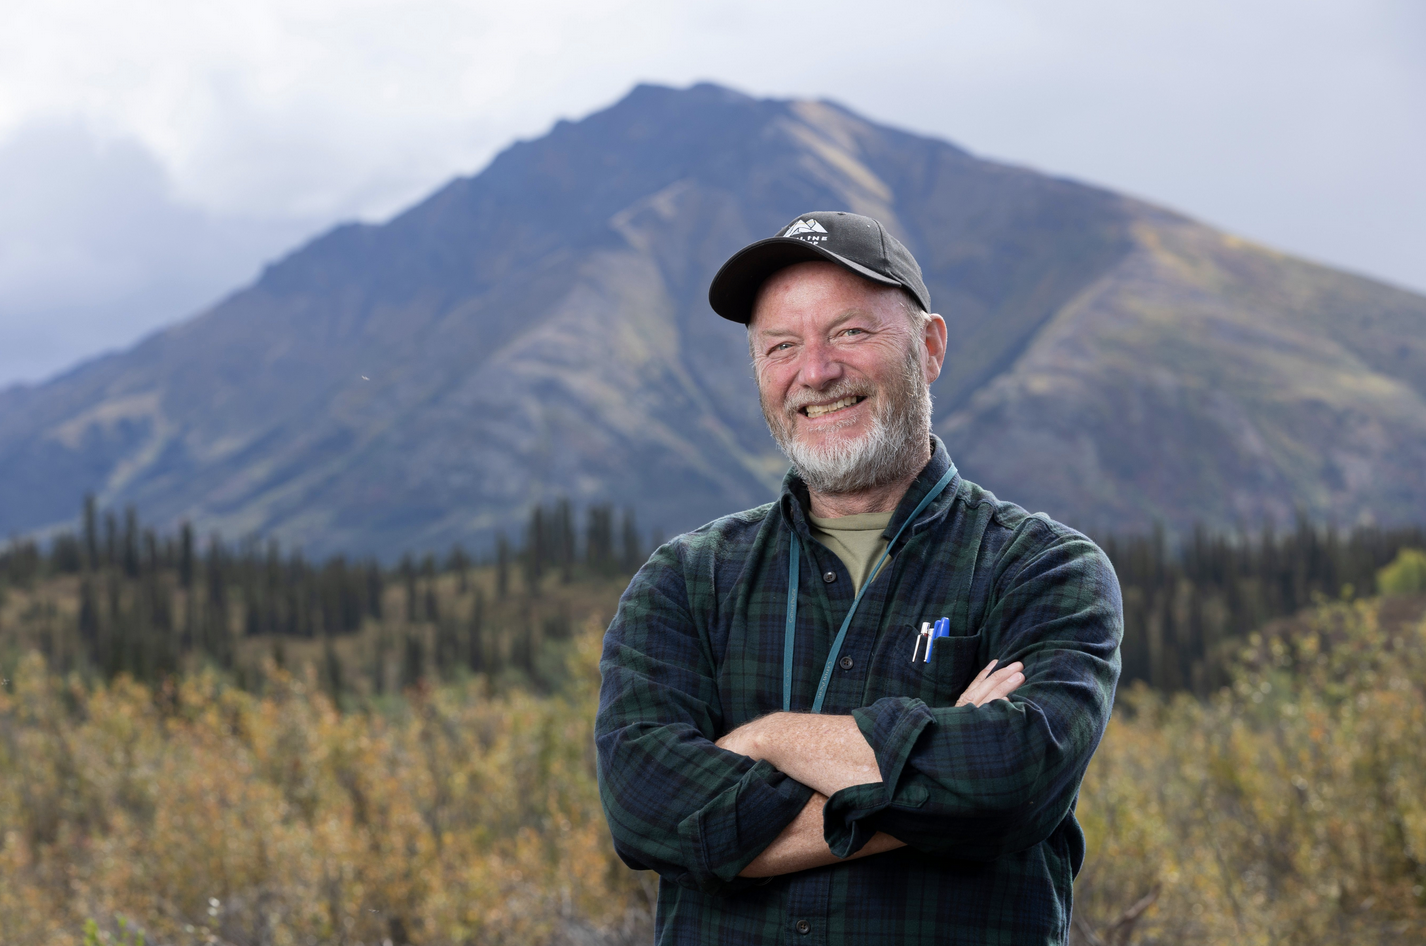 DR. CRAIG HART RECEIVES THE J.C. SPROULE NORTHERN EXPLORATION AWARD FOR EXCELLENCE IN NORTHERN EXPLORATION AND DEVELOPMENT